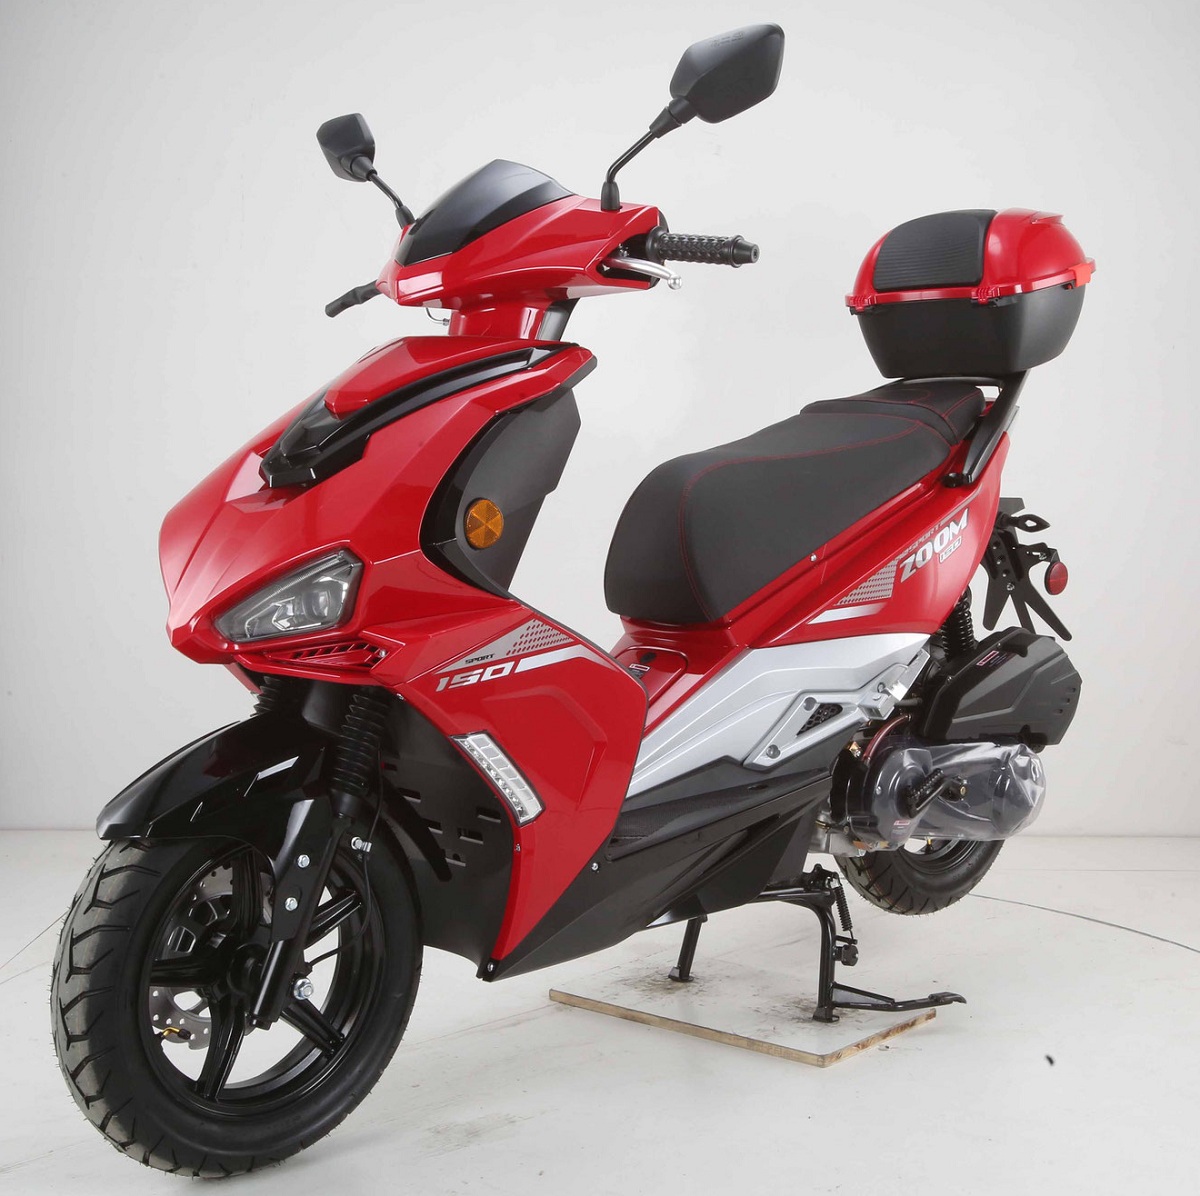 Vitacci Zoom 150Cc Scooter, GY6 4-Stroke, Air Cooled, CVT automatic - Red